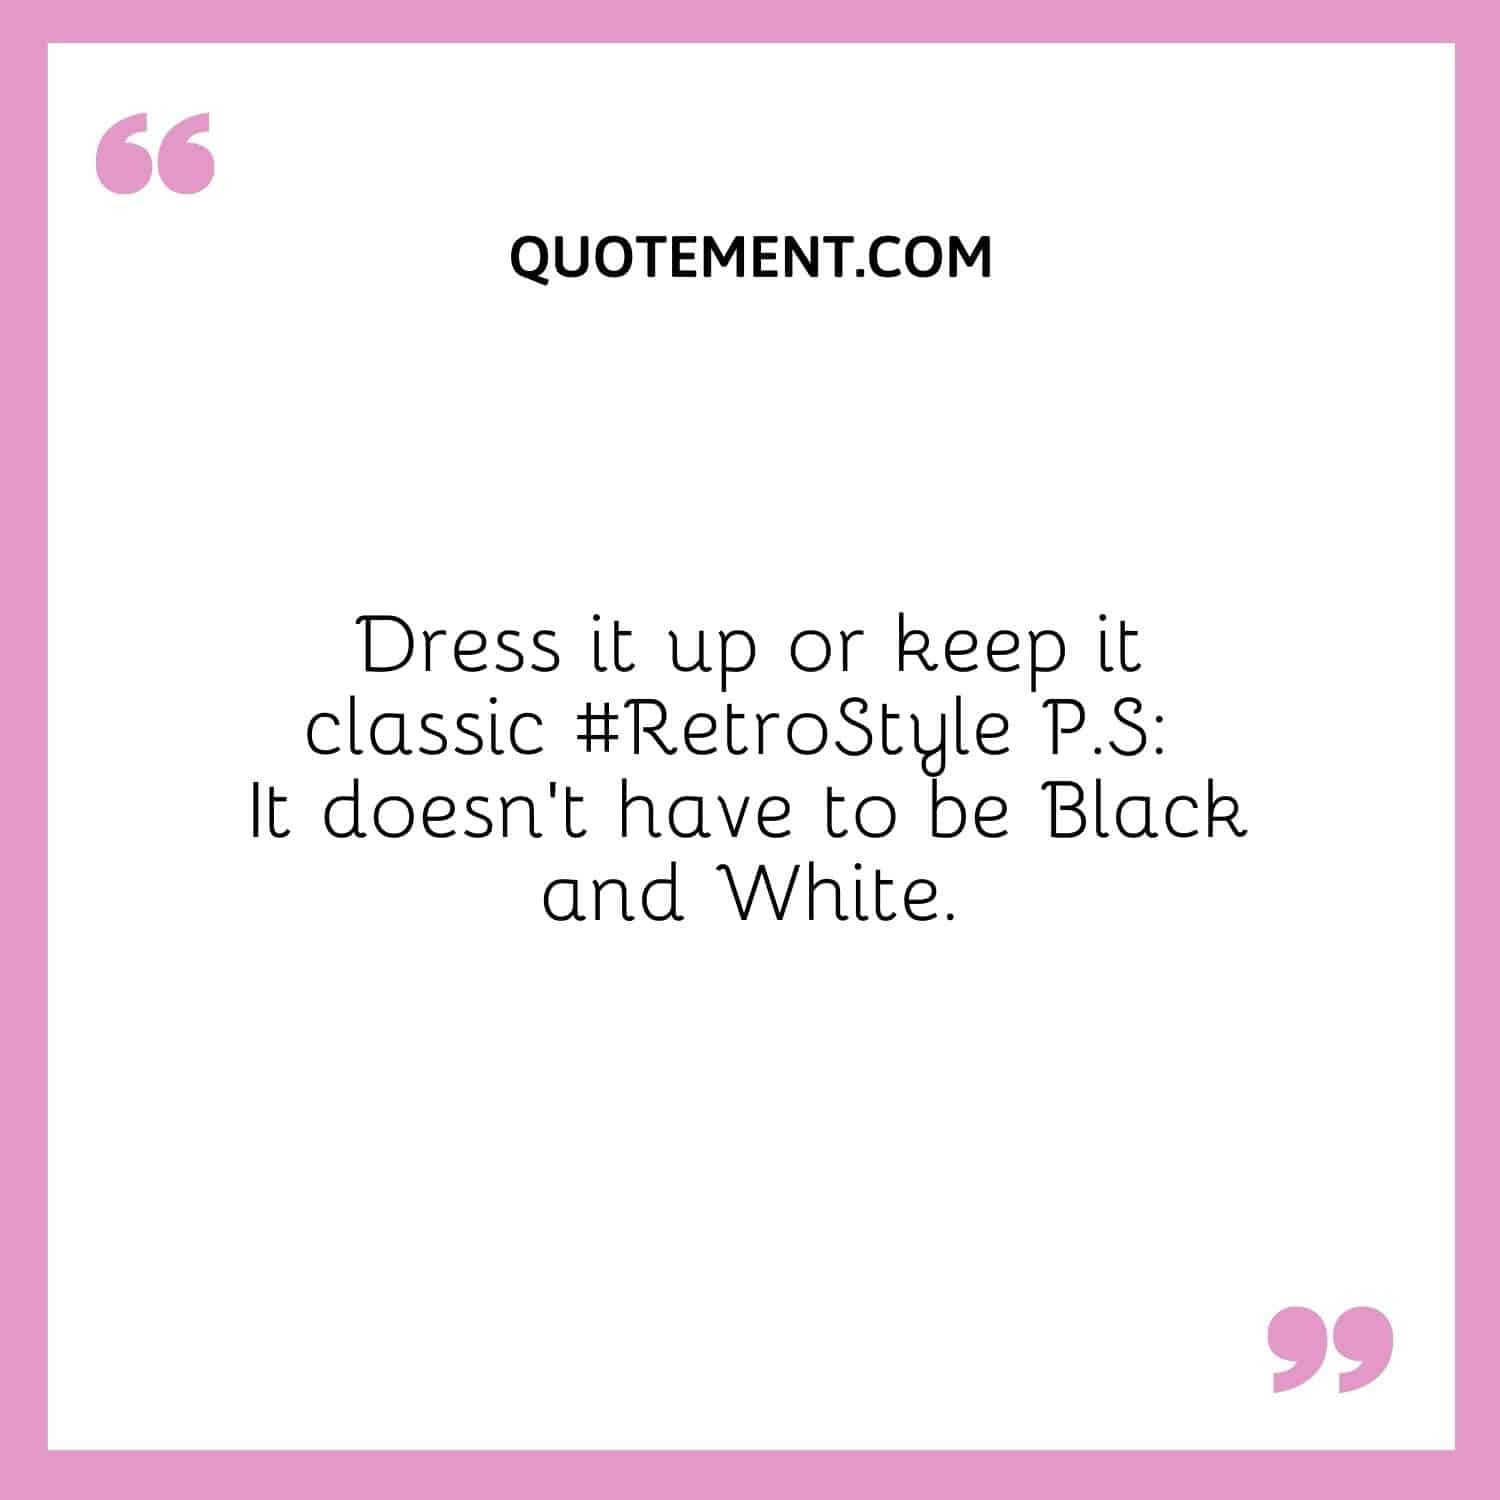 Dress it up or keep it classic